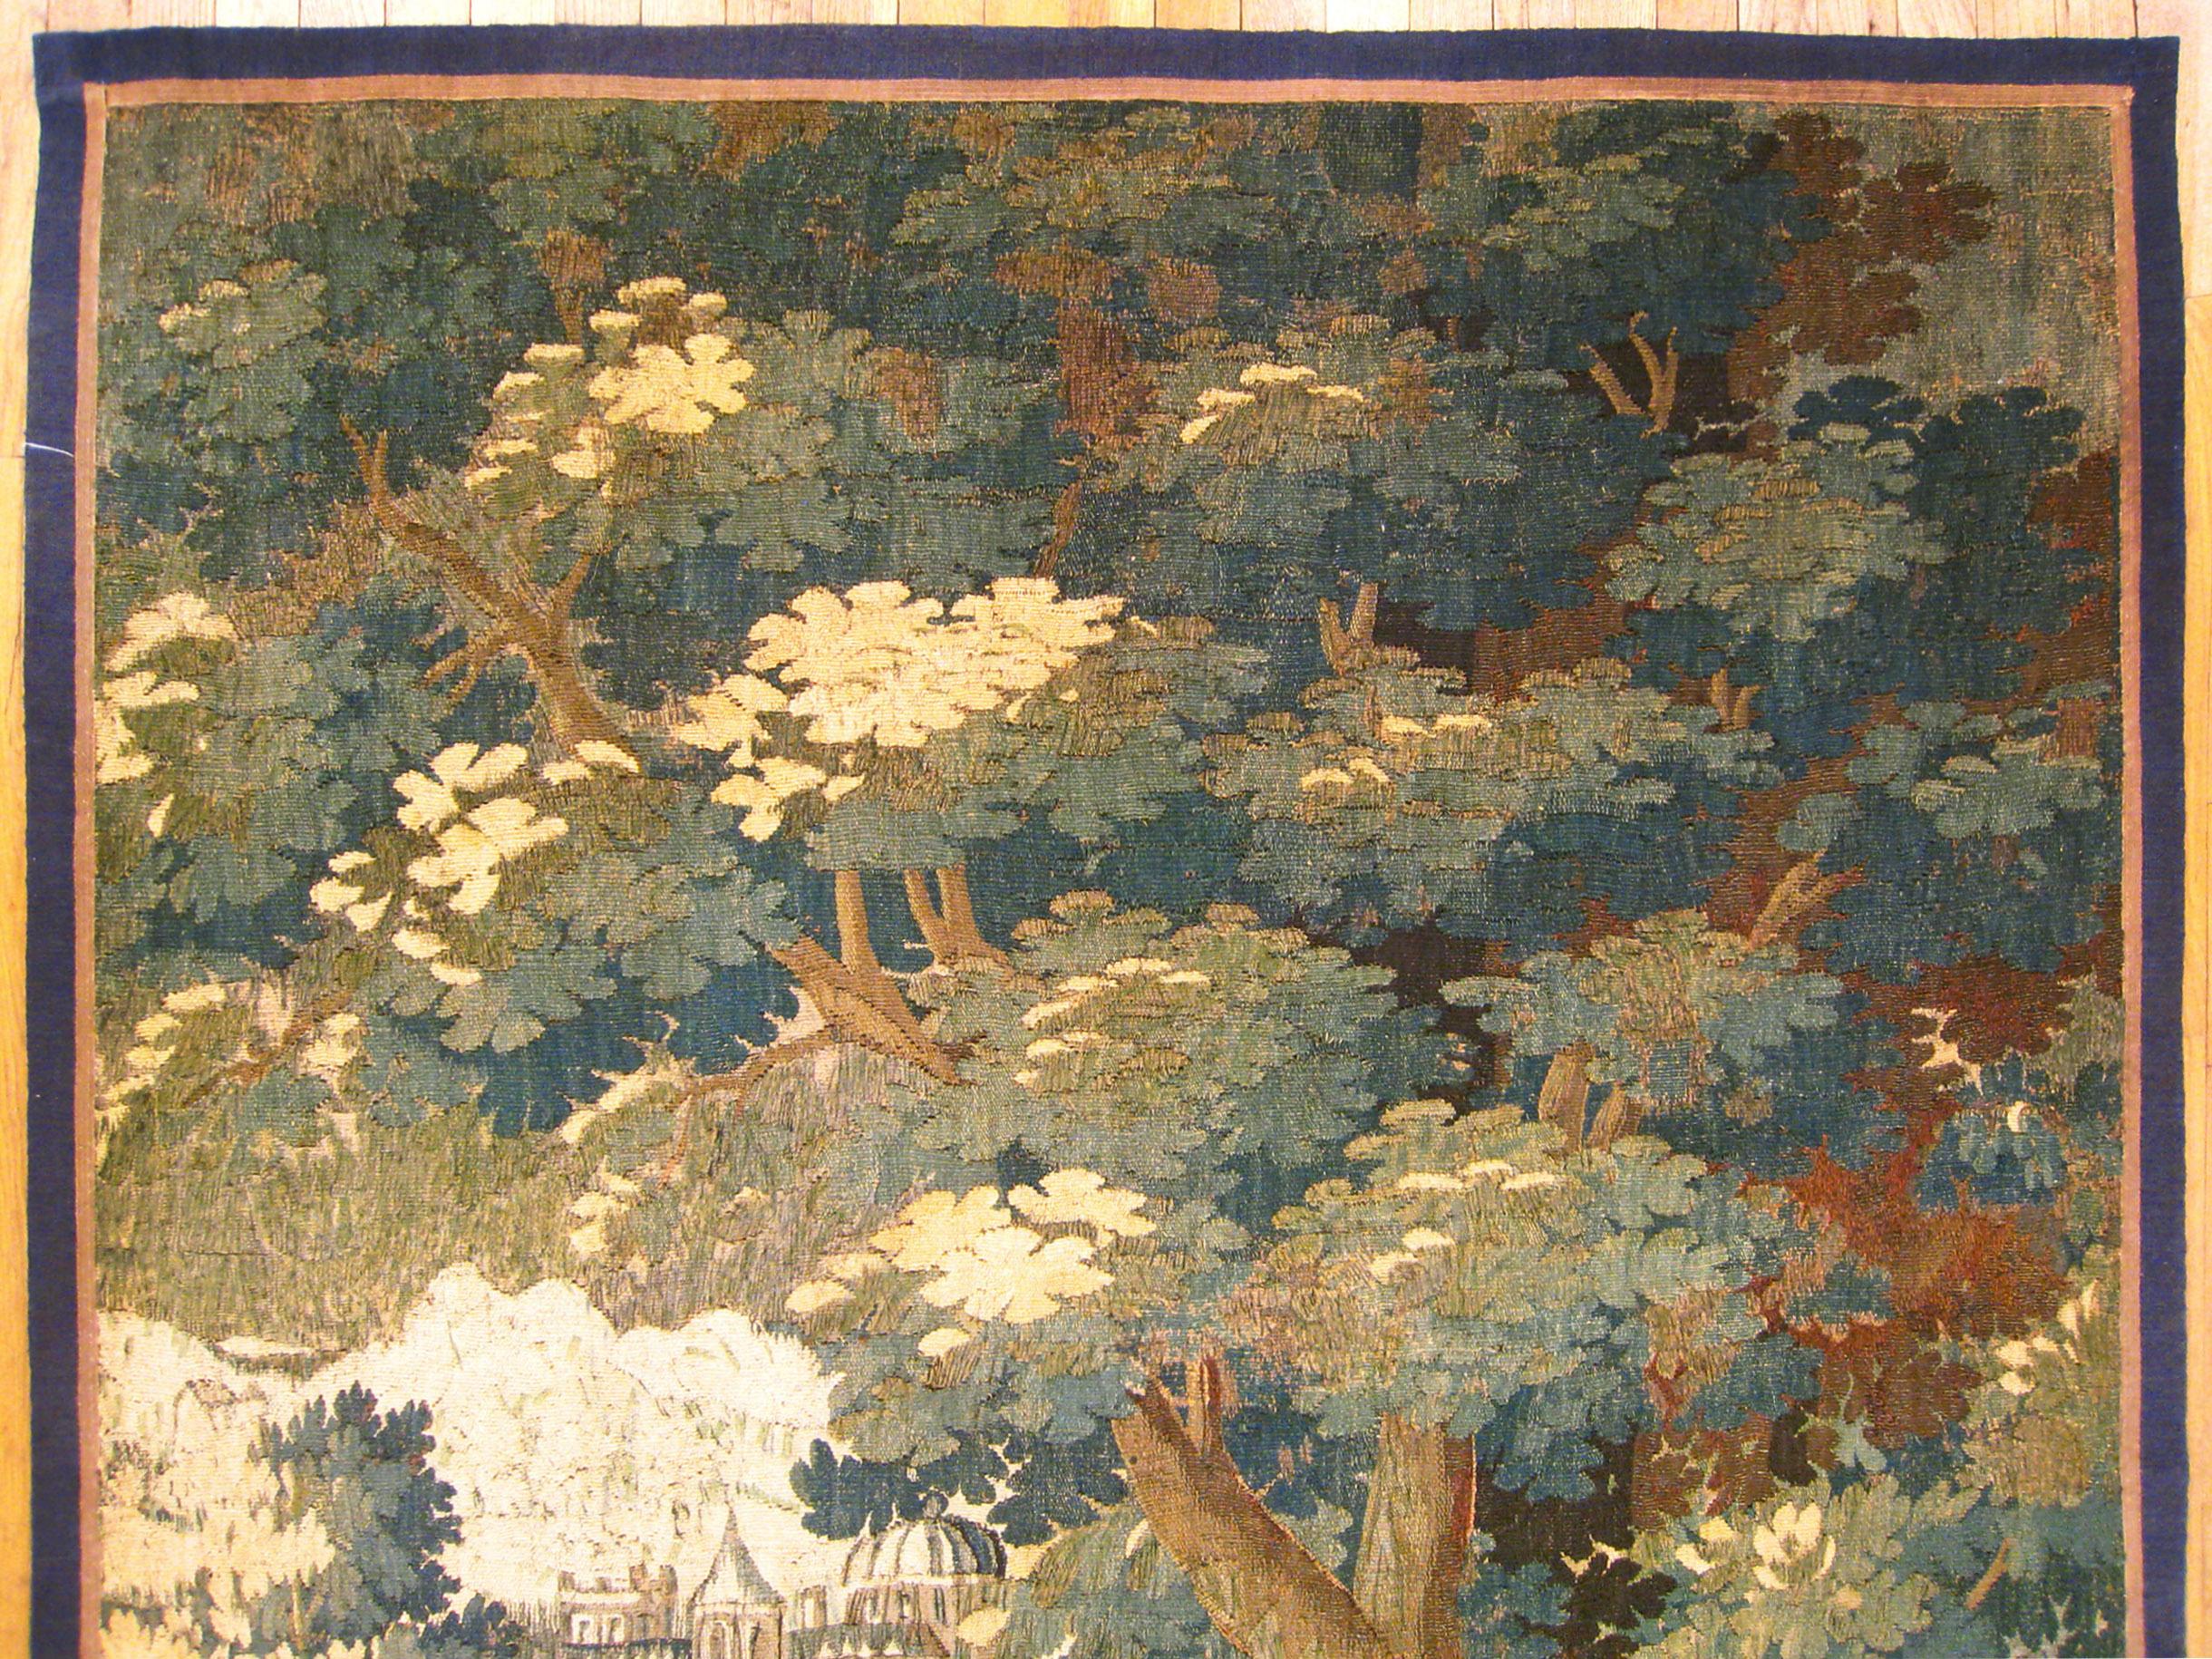 An antique 17th century Flemish Verdure Landscape Tapestry

An antique 17th century Flemish verdure landscape tapestry, size: 7.4 H x 4.9 W. This fine handwoven European wall hanging features a lovely landscape scene, with an exotic bird in a lush